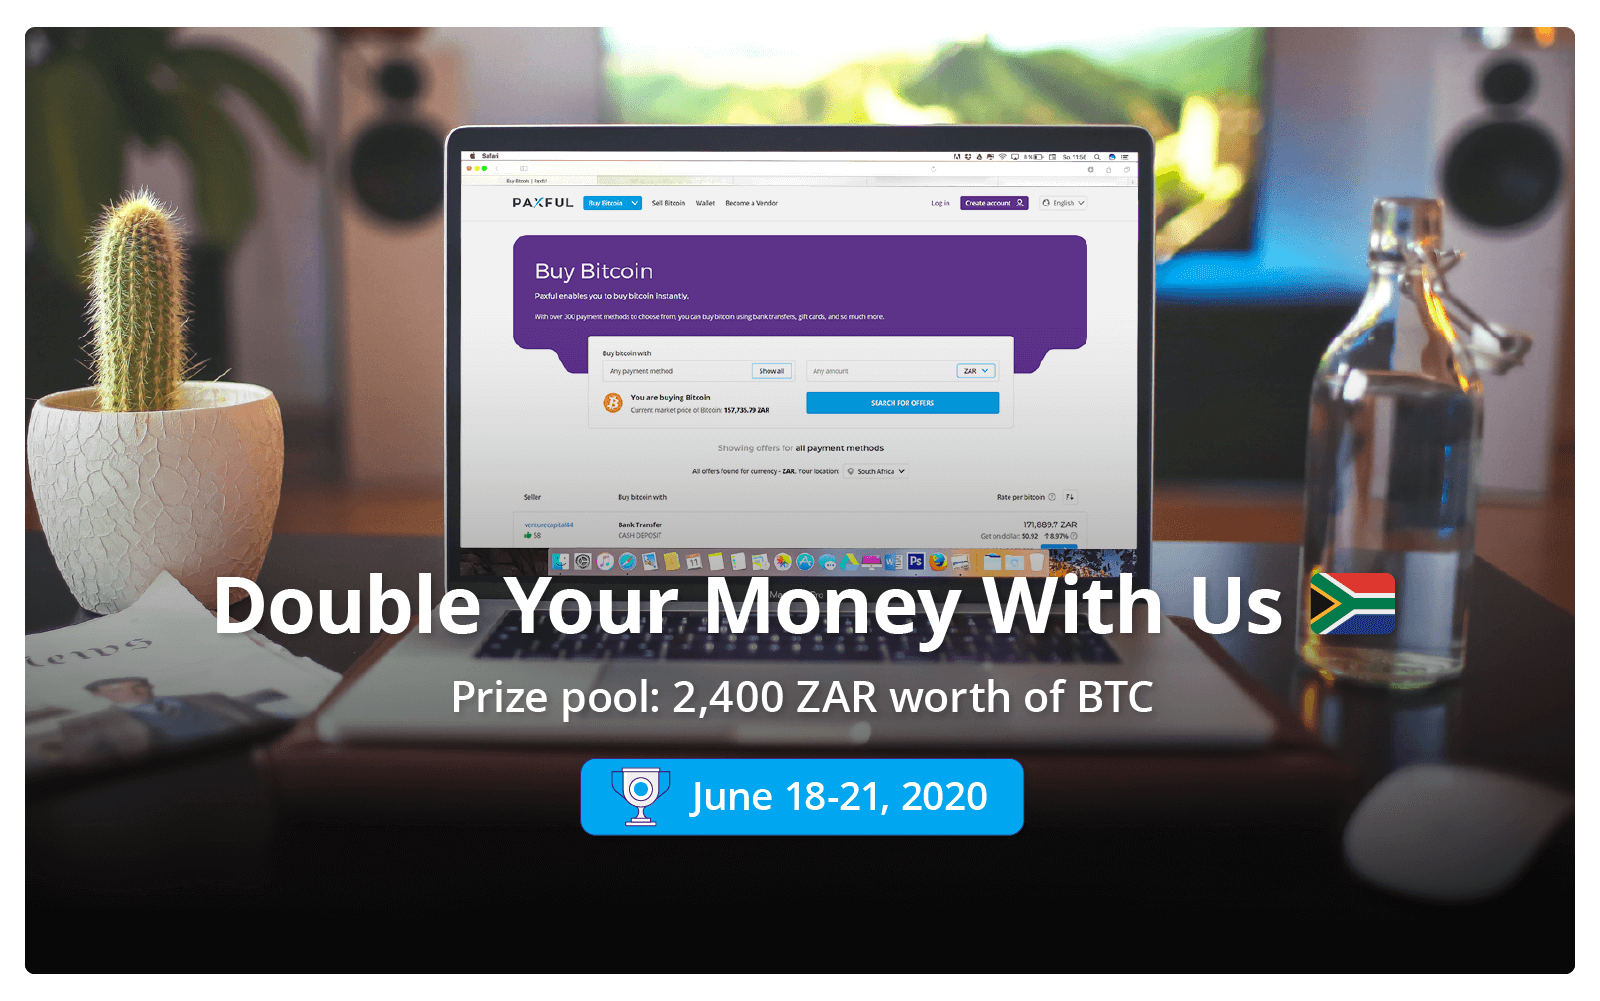 Double Your Money with BTC